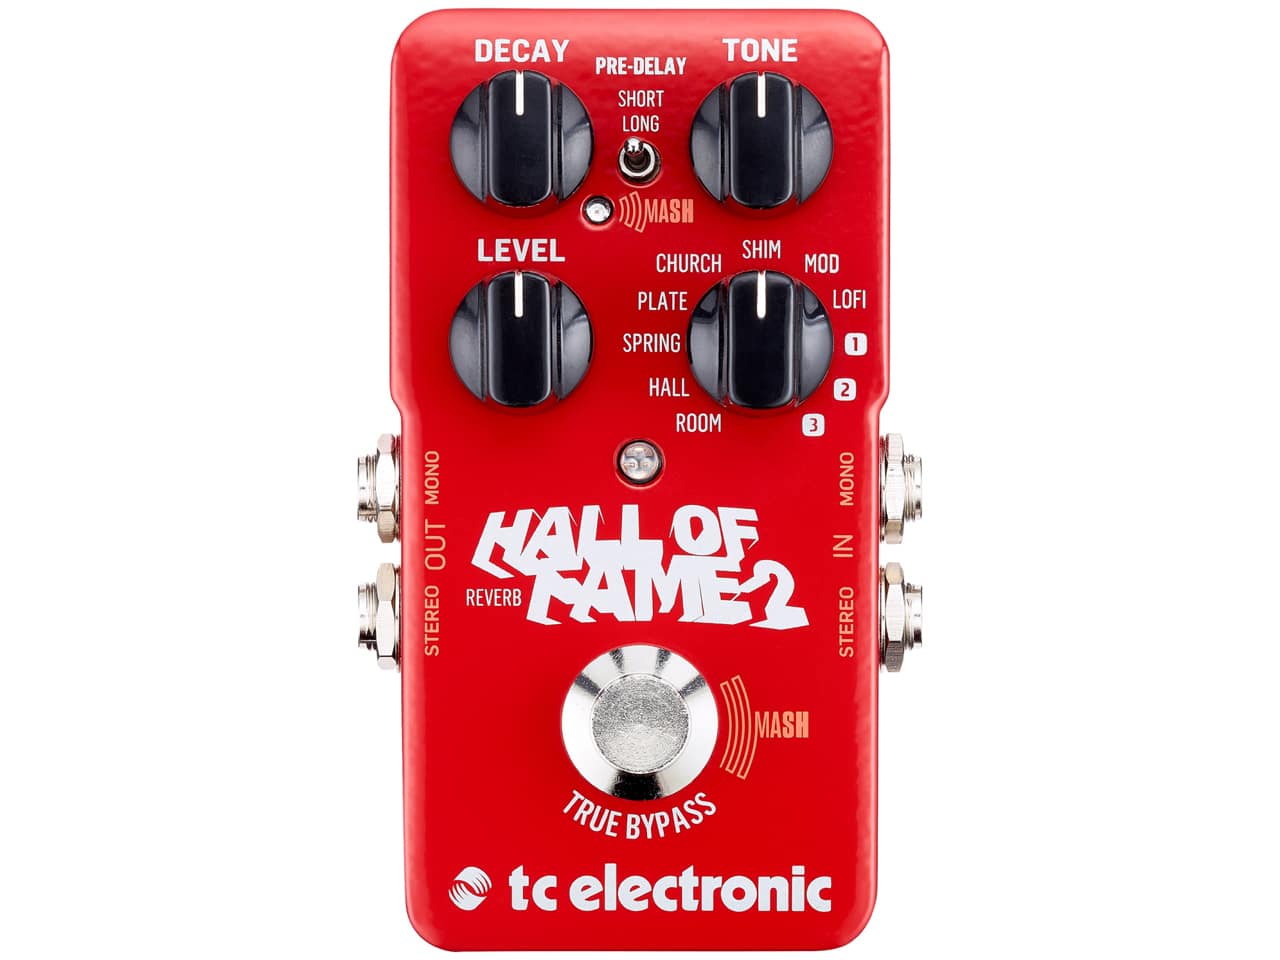 tc electronic HALL OF FAME 2 REVERB<br>(リバーブ)(ティーシーエレクトロニック) 駅前店